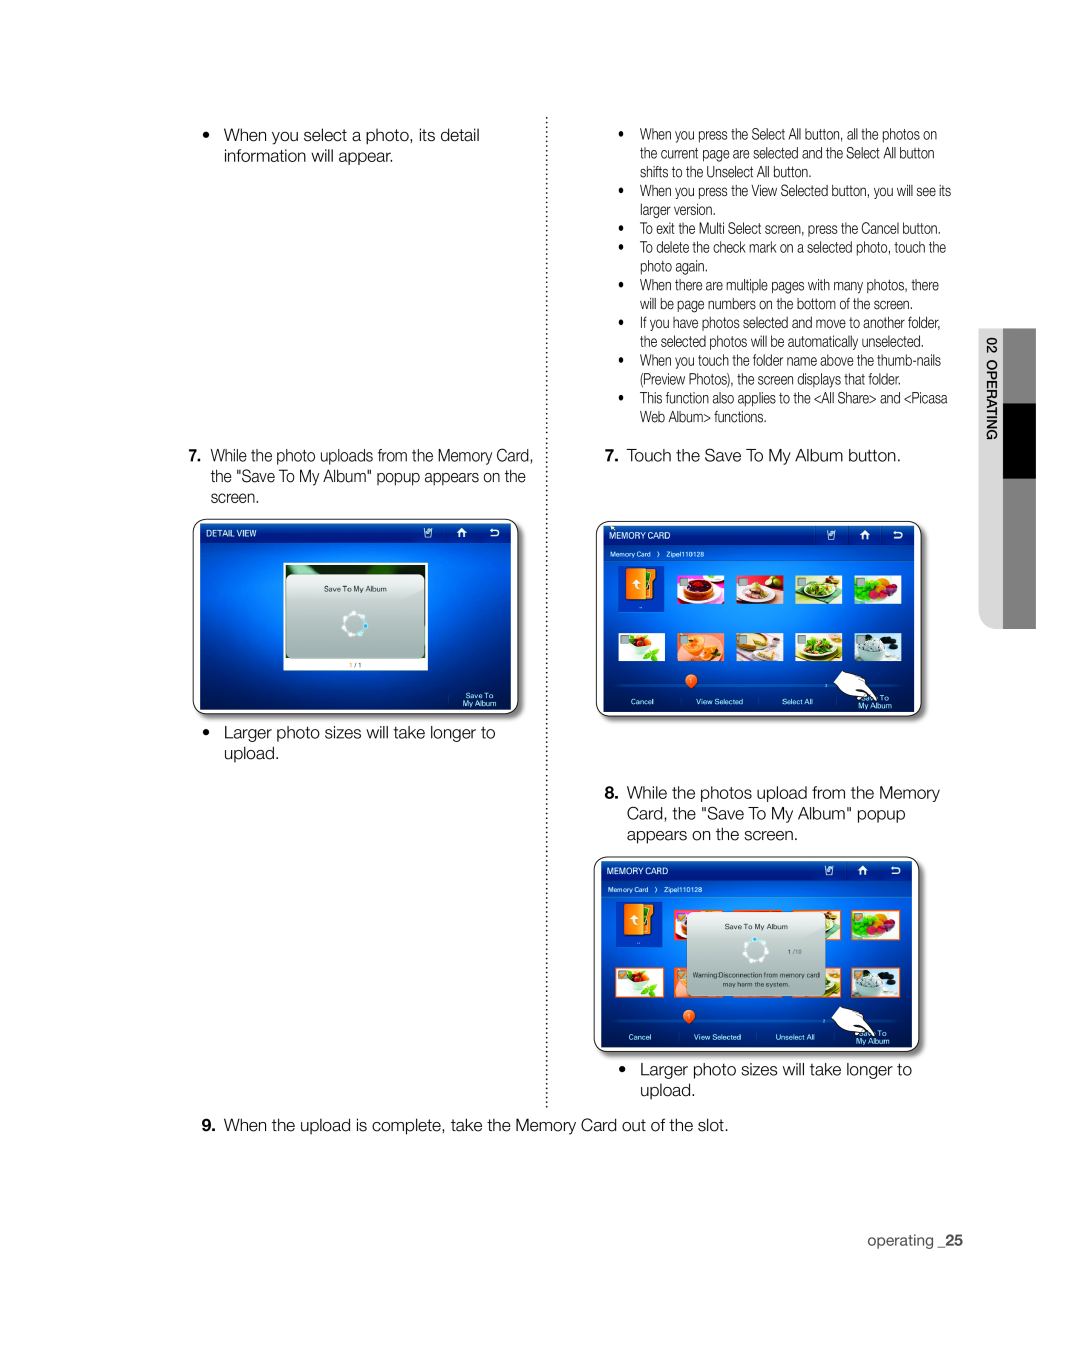 Samsung RSG309** user manual To delete the check mark on a selected photo, touch the photo again 